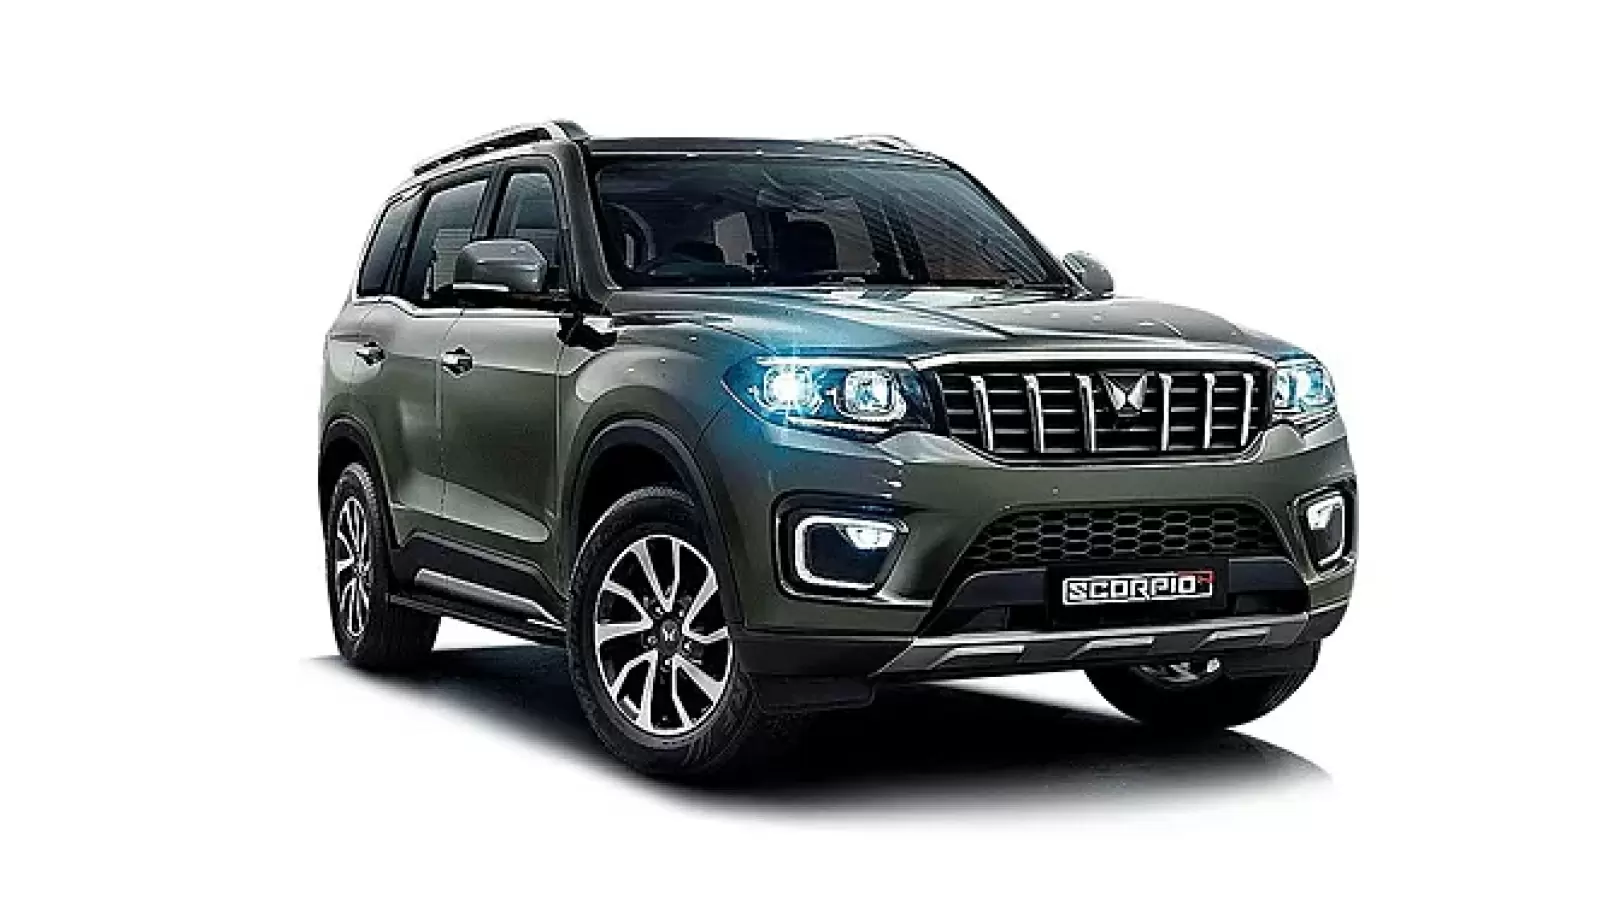 Mahindra SUV boosted the company's sales, crossed the 1 lakh production mark in just a few days